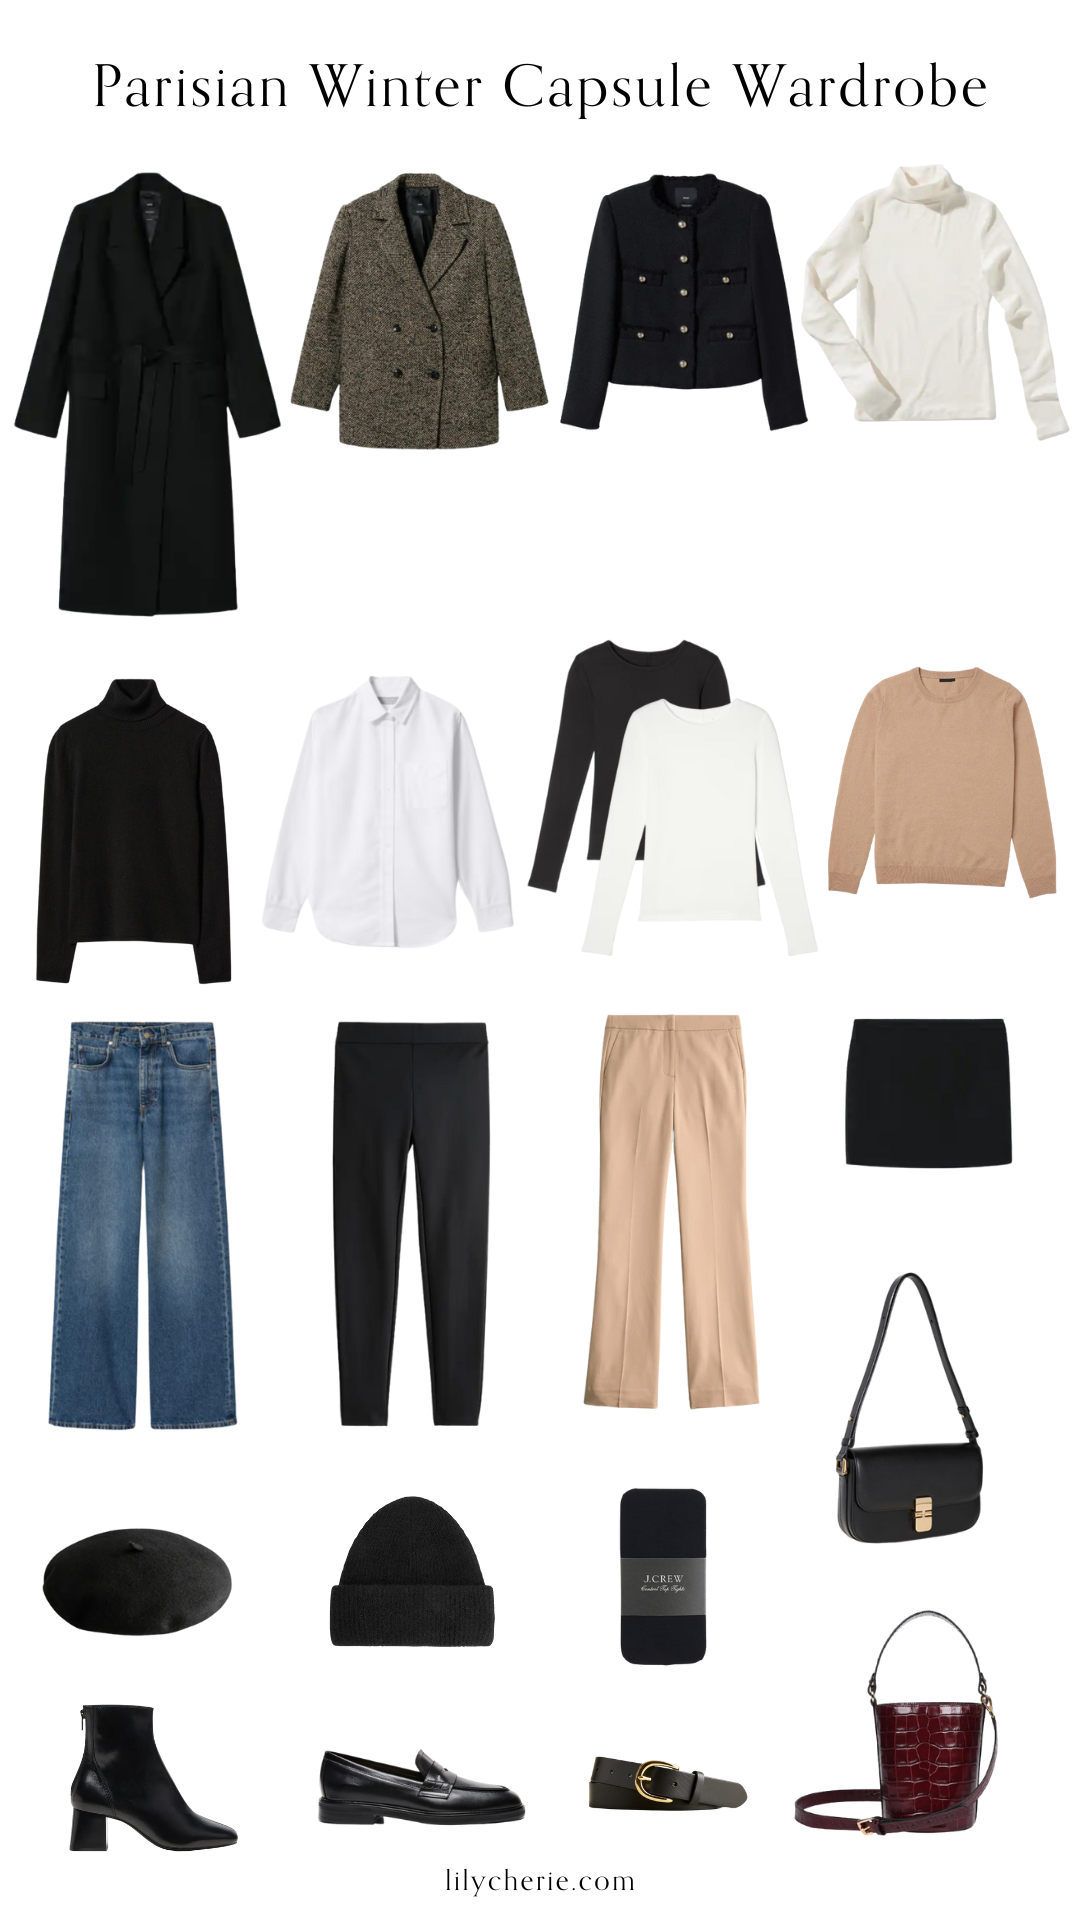 Your Guide to a Chic and Classic Work Capsule Wardrobe - MY CHIC